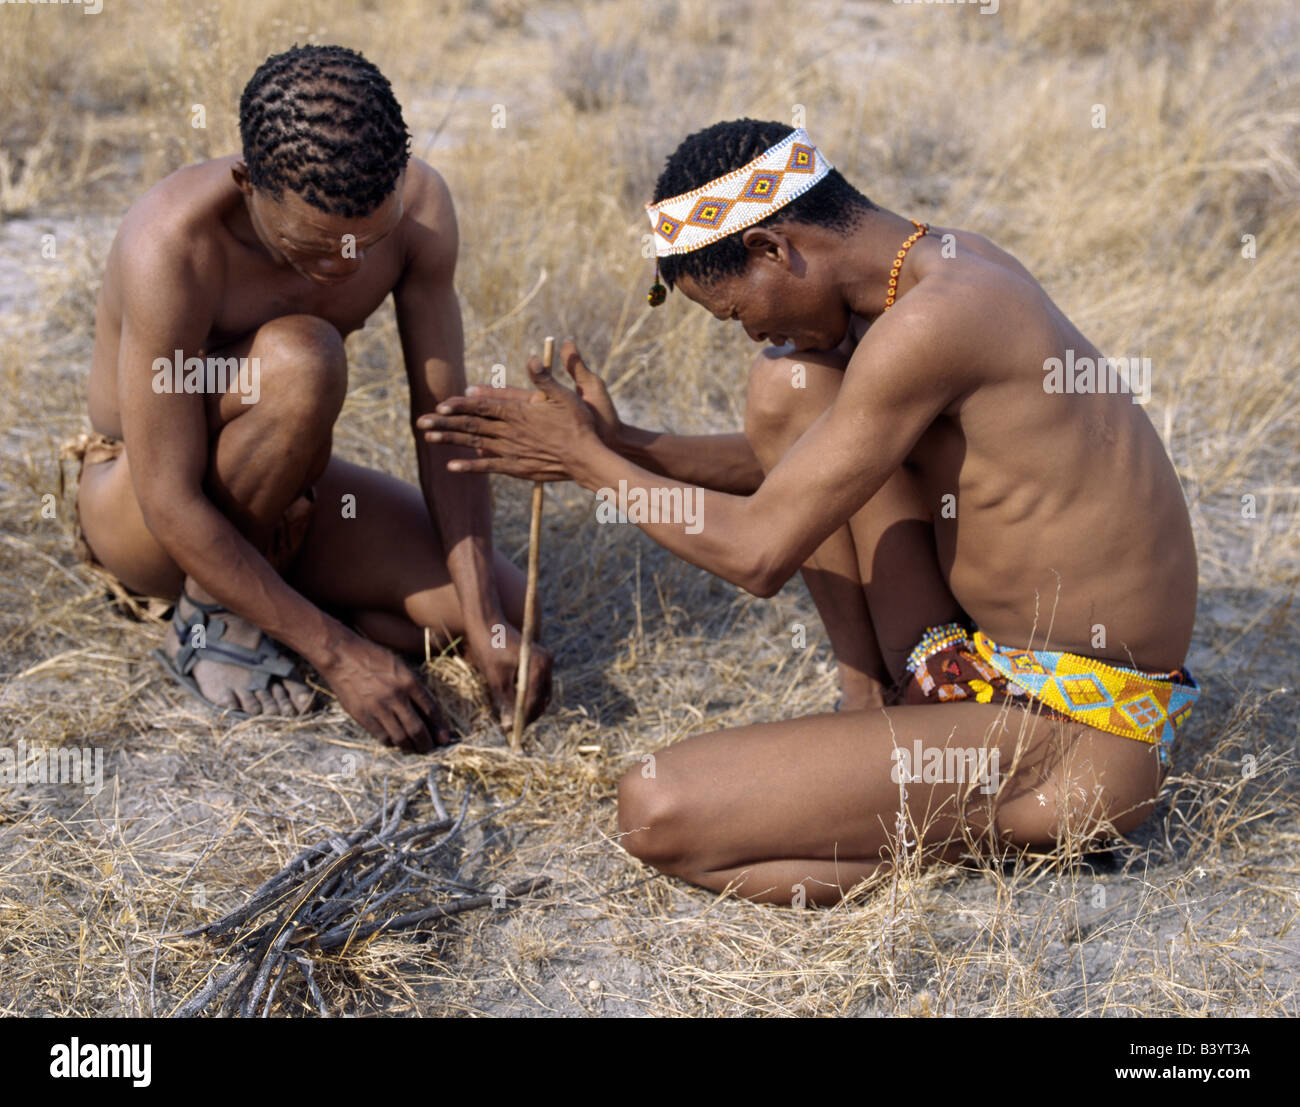 Namibia, Eastern Bushmanland, Tsumkwe. Two !Kung hunter-gatherers light a fire using firesticks. The !Kung people are a part of the San, often referred to as Bushmen. They differ in appearance from the rest of black Africa having yellowish skin and being lightly boned, lean and muscular. They speak with four distinct click consonants.The !Kung live in the harsh environment of a vast expanse of flat sand and bush scrub country straddling the Namibia-Botswana border. Until recently, their way of life had remained unchanged for thousands of years. Few now live solely by hunting and gathering. Stock Photo